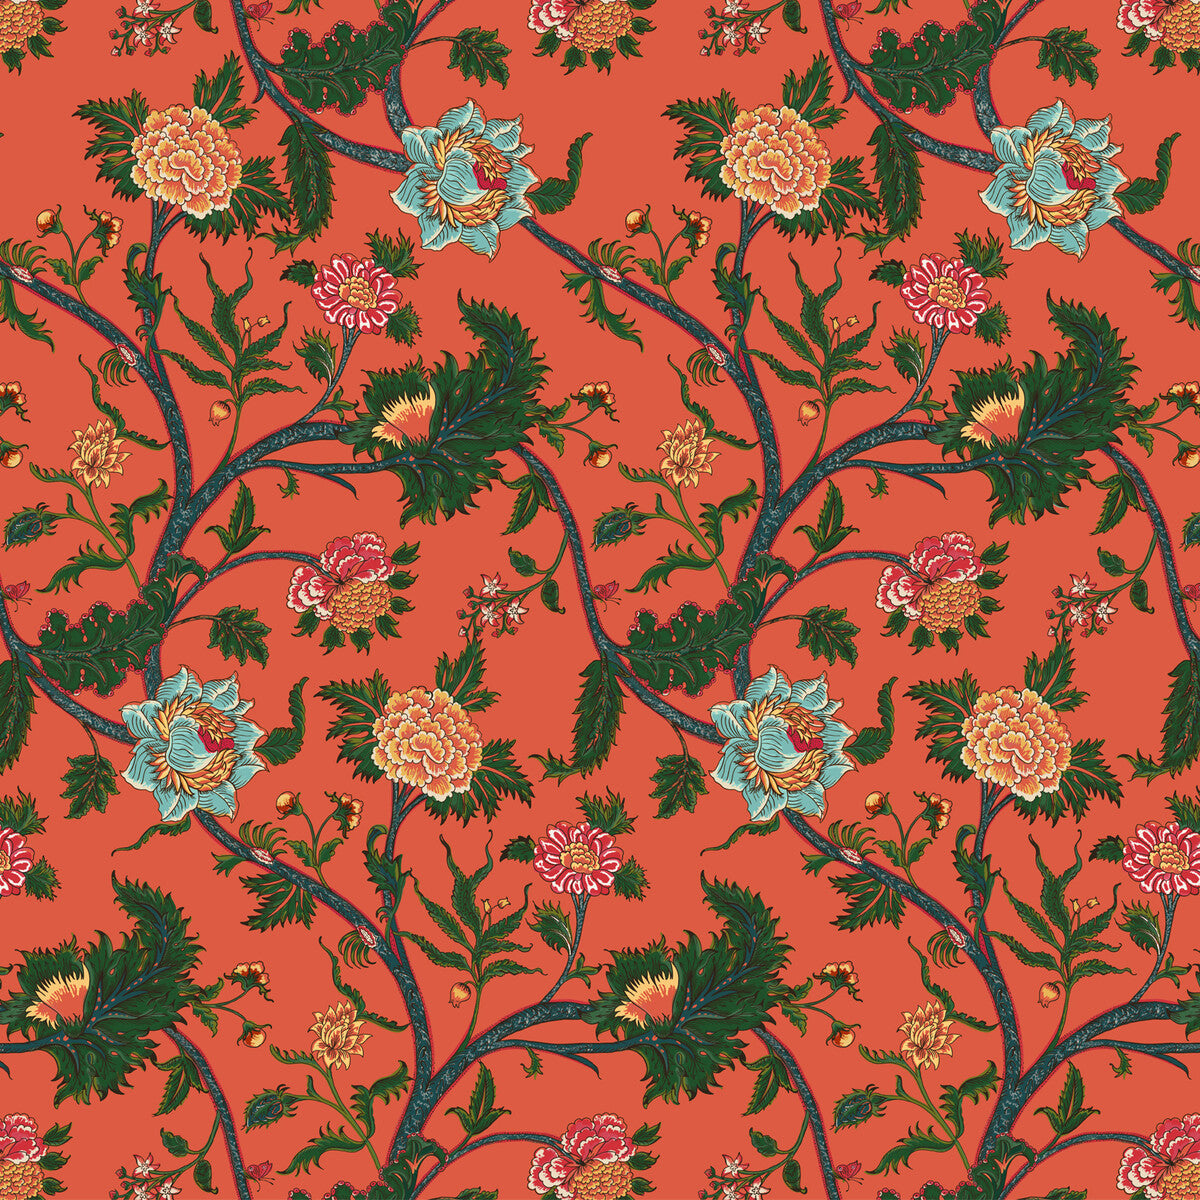 Palampore fabric in coral color - pattern GDT5545.001.0 - by Gaston y Daniela in the Gaston Libreria collection